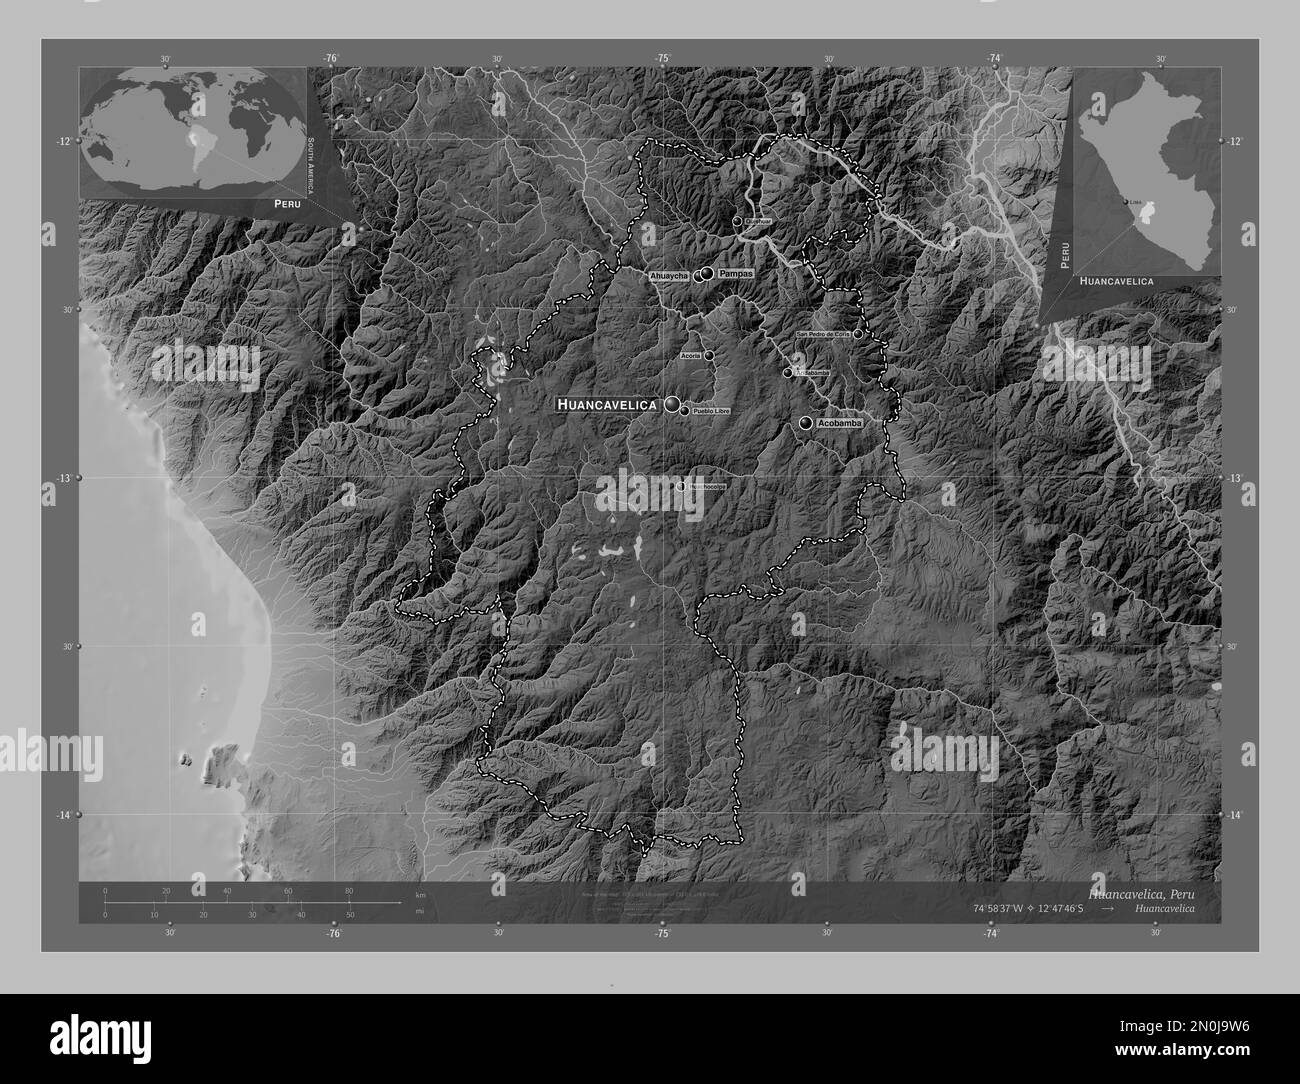 Huancavelica, region of Peru. Grayscale elevation map with lakes and rivers. Locations and names of major cities of the region. Corner auxiliary locat Stock Photo